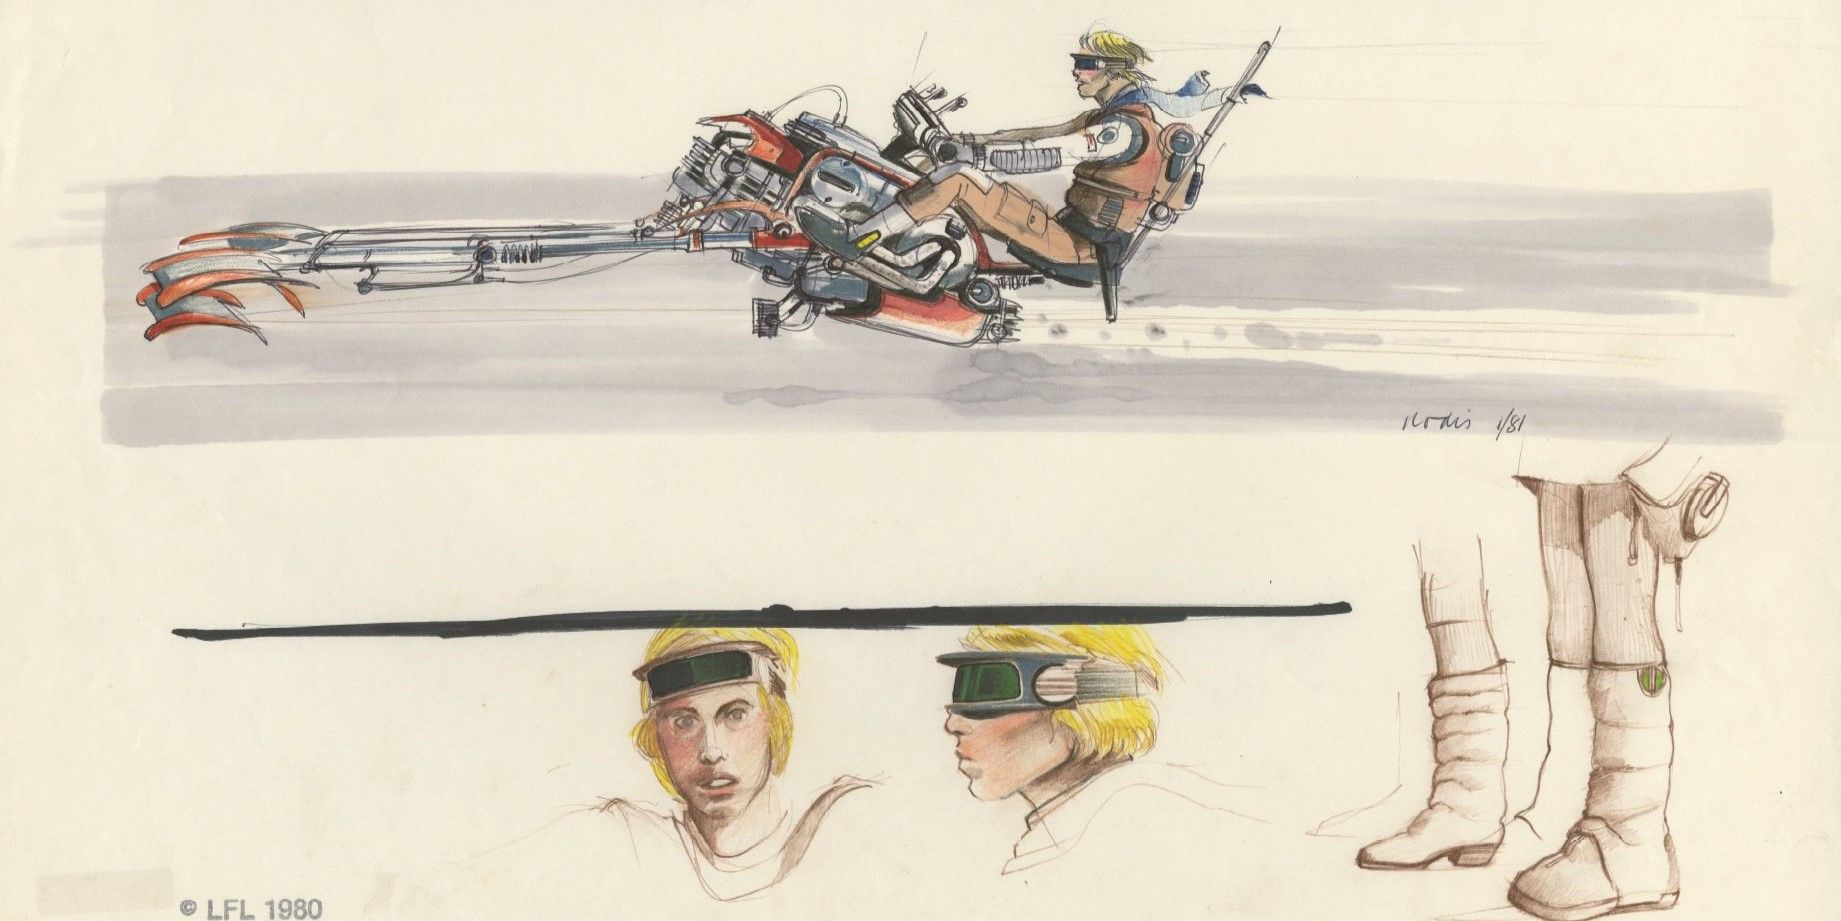 Concept art of the speeder bikes featured on Endor in Return of the Jedi